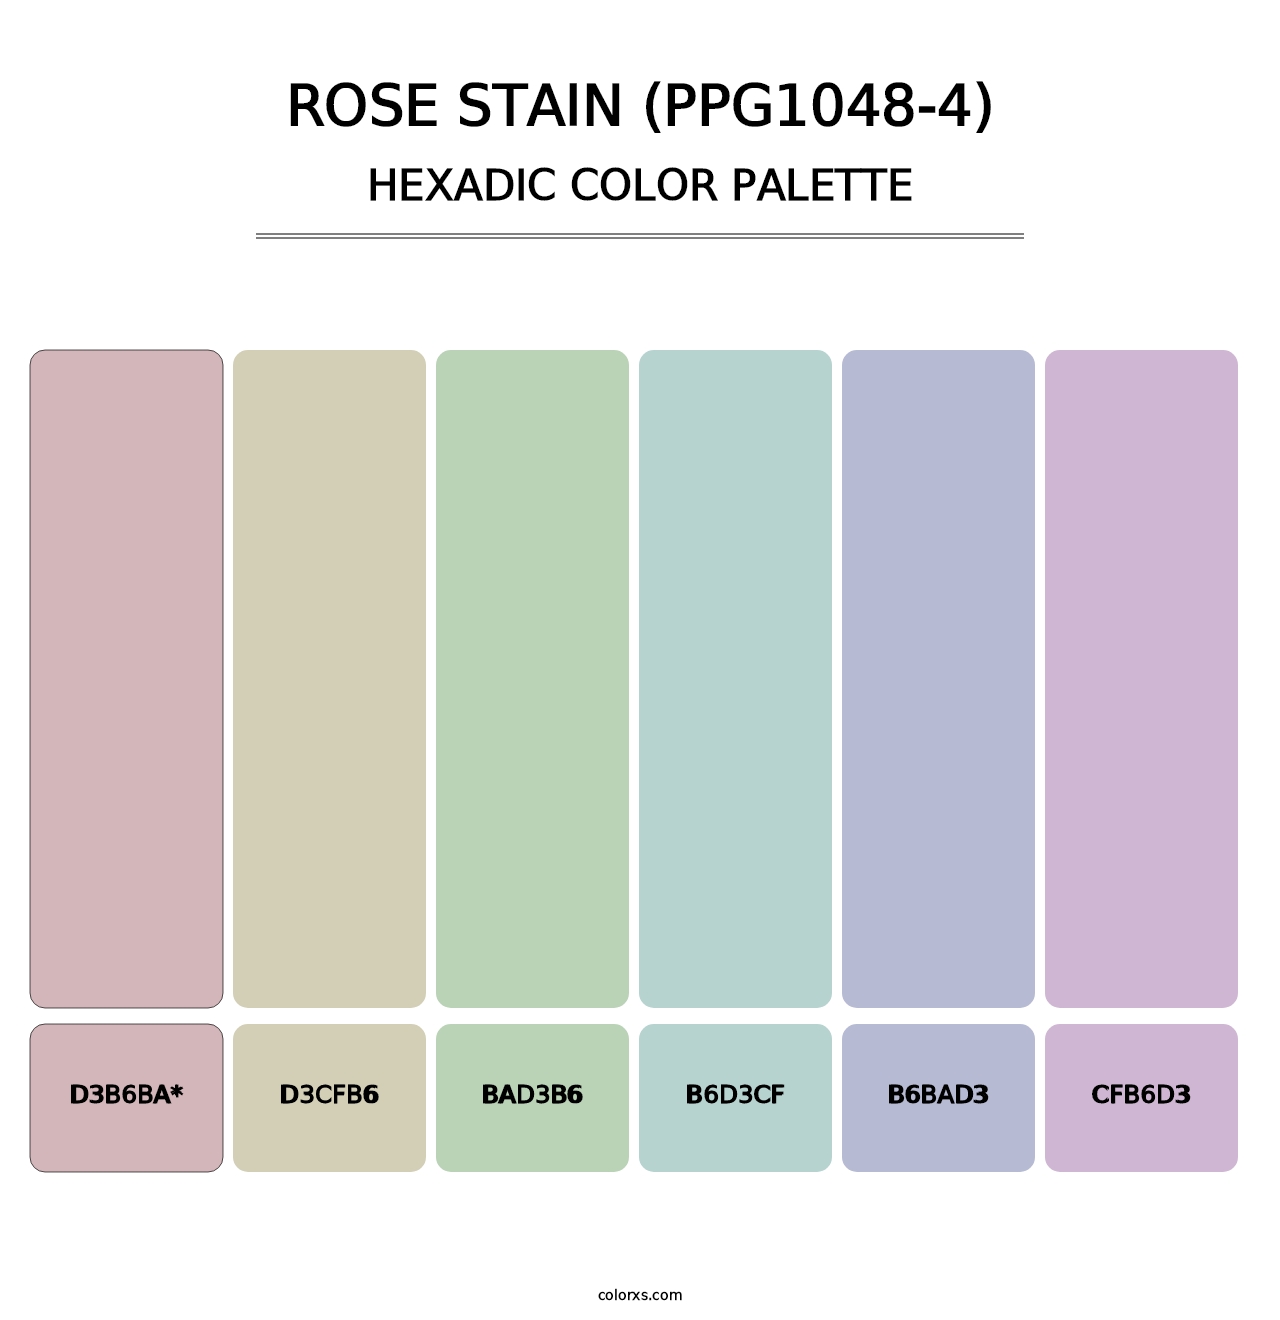 Rose Stain (PPG1048-4) - Hexadic Color Palette